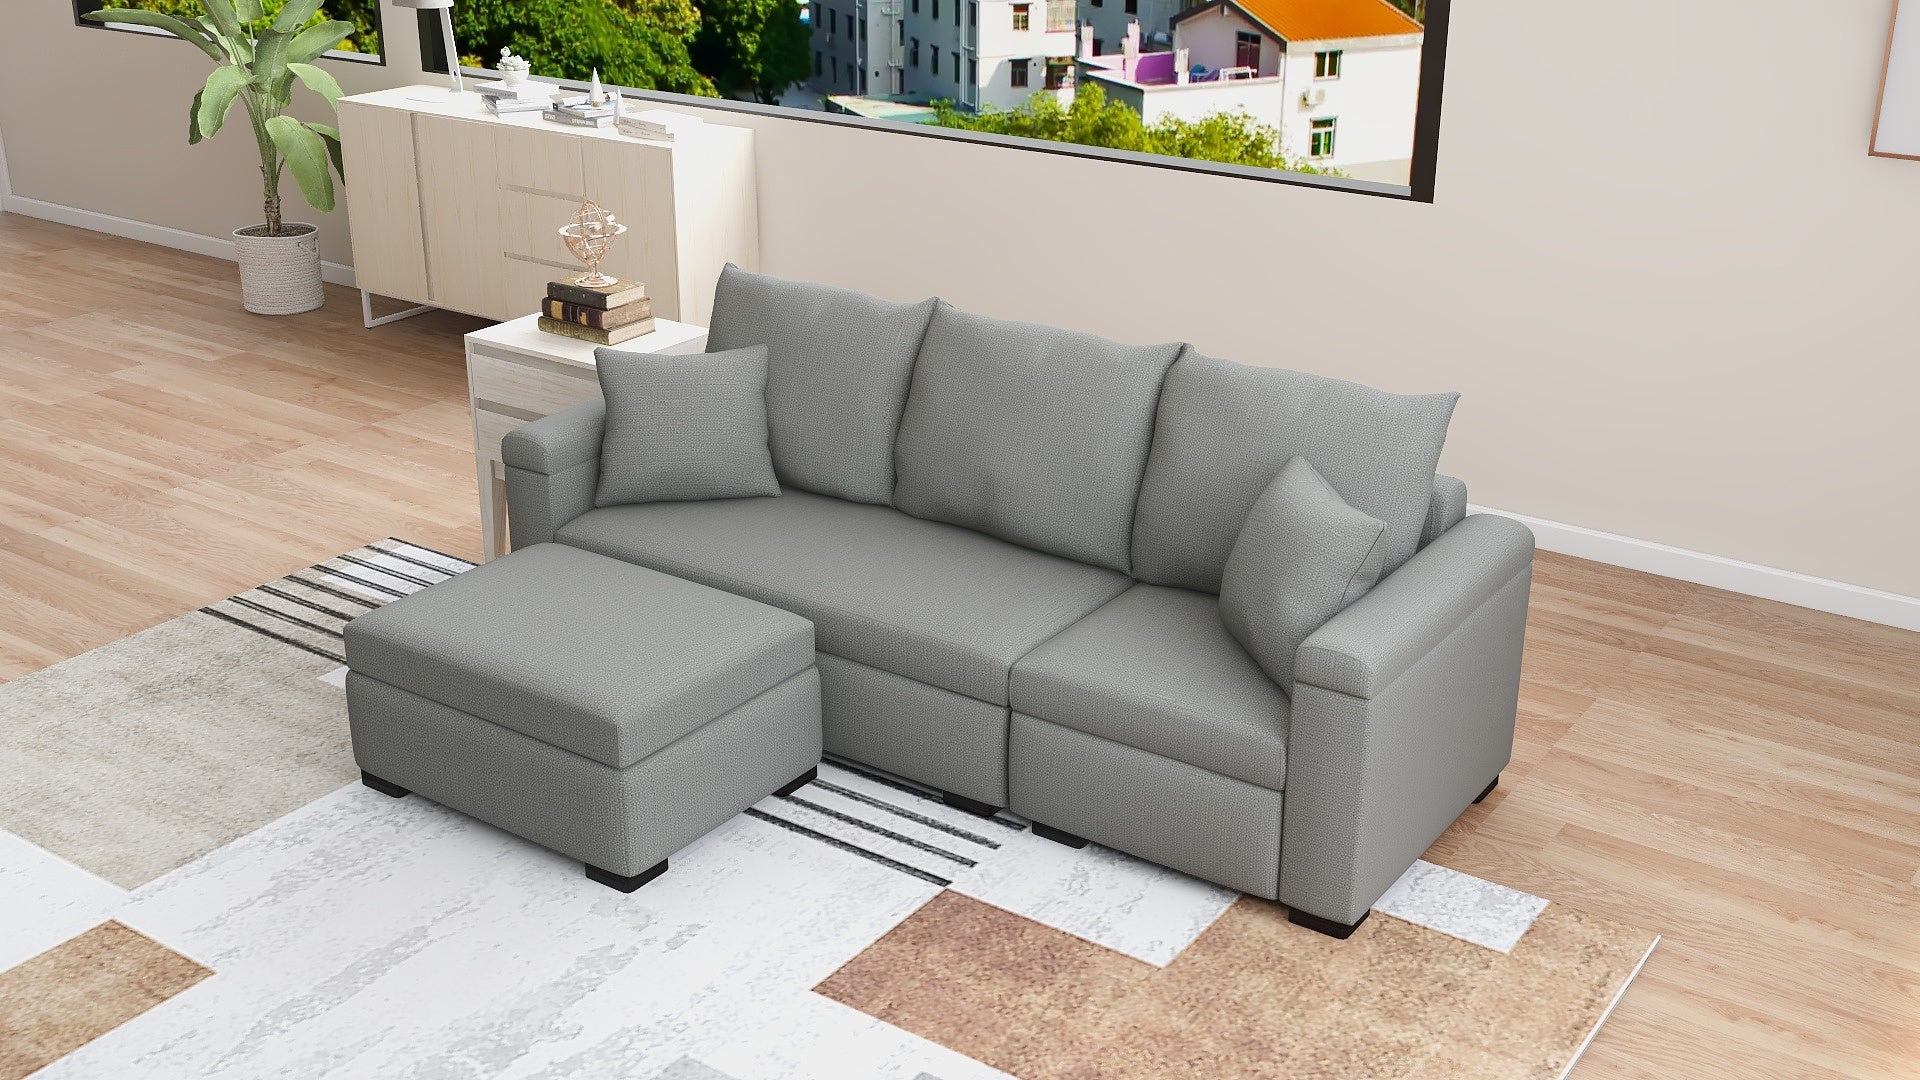 STELLA Fabric Sofa w/ Ottoman and Pillows AF Home